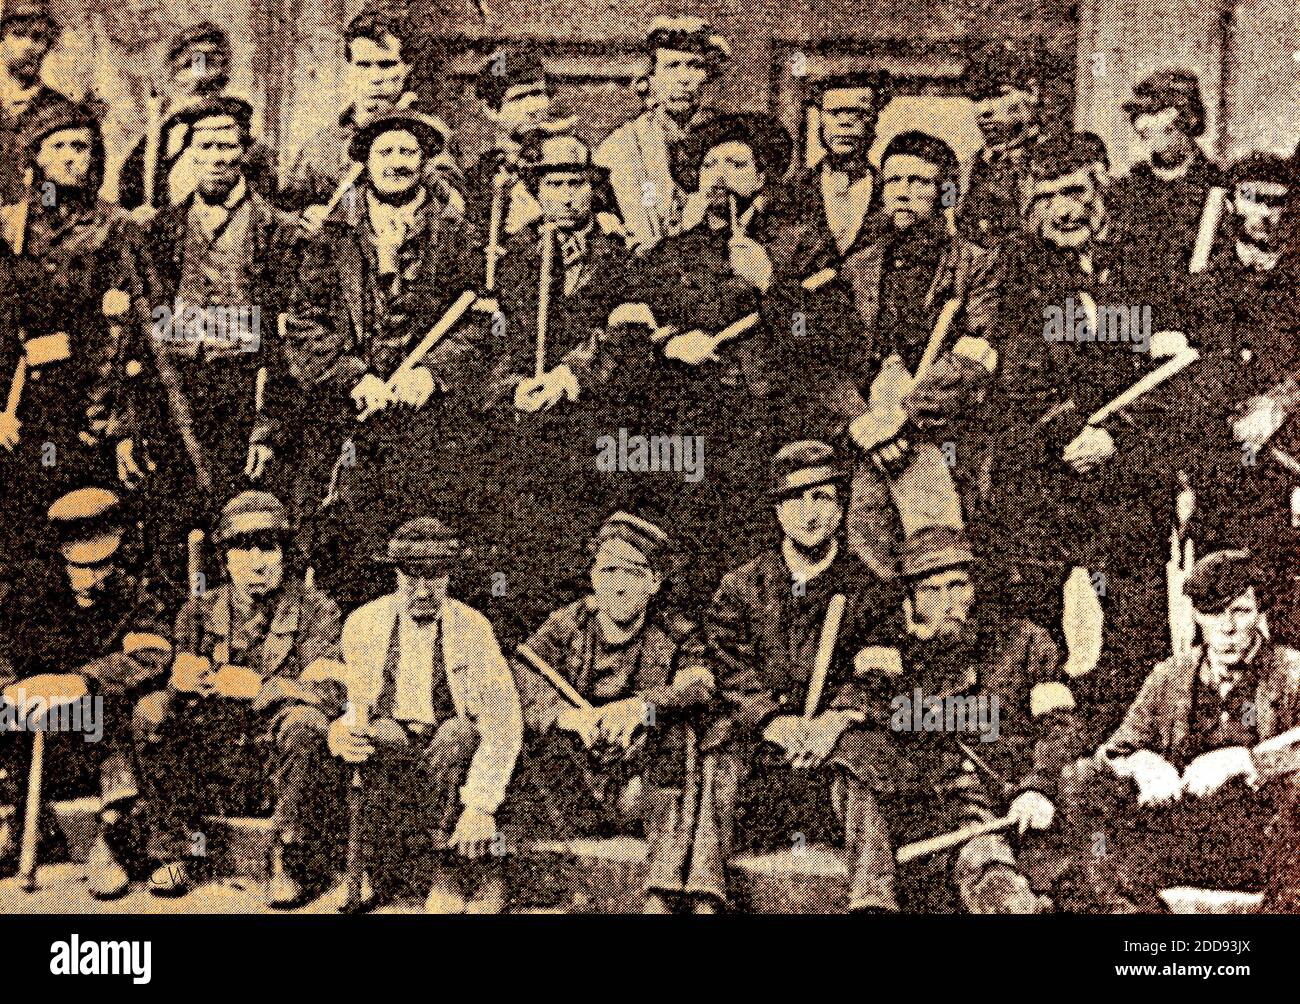 A rare old image of (Yorkshire) 'keepers of the peace'  for the 1864 local elections in Whitby, Yorkshire.These non uniformed ruffians were engaged for their toughness . Their job was to quell riotous behavior and  take  troublemakers into custody. They were in effect the fore-runners of special constables. Stock Photo